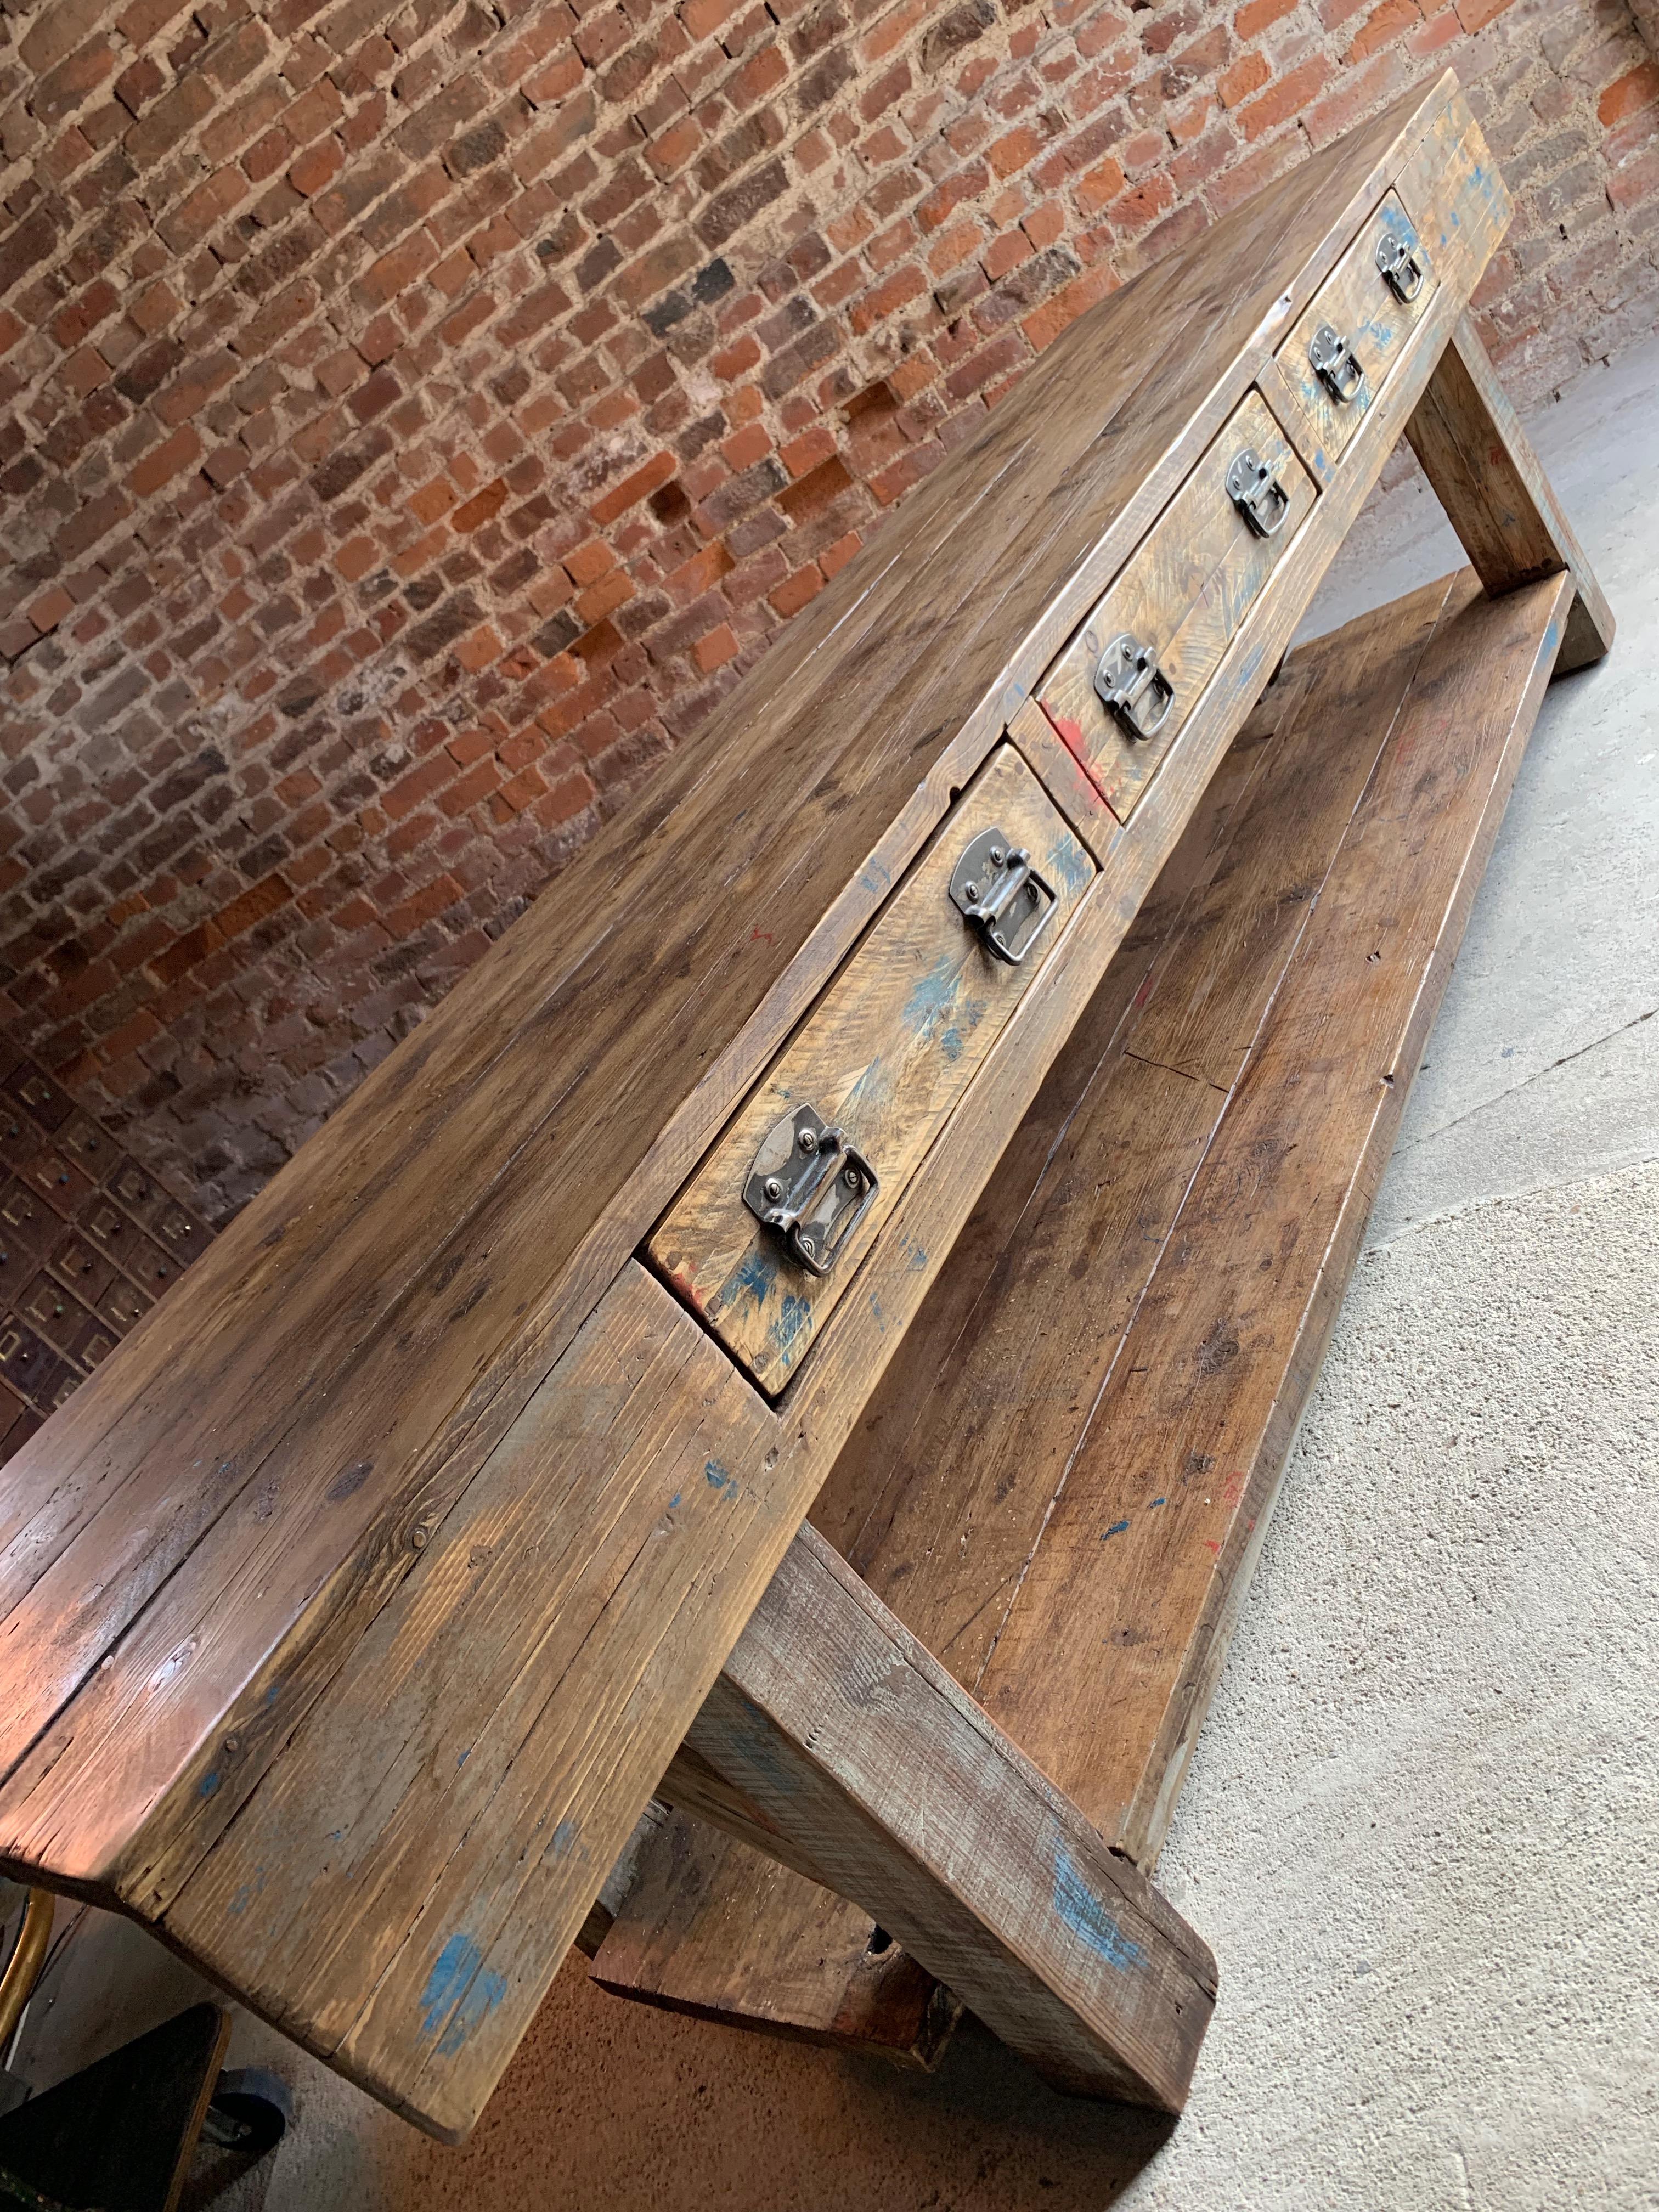 Mid-20th Century Industrial Table Oak & Pine Work Bench Sideboard Distressed Loft Style Antique